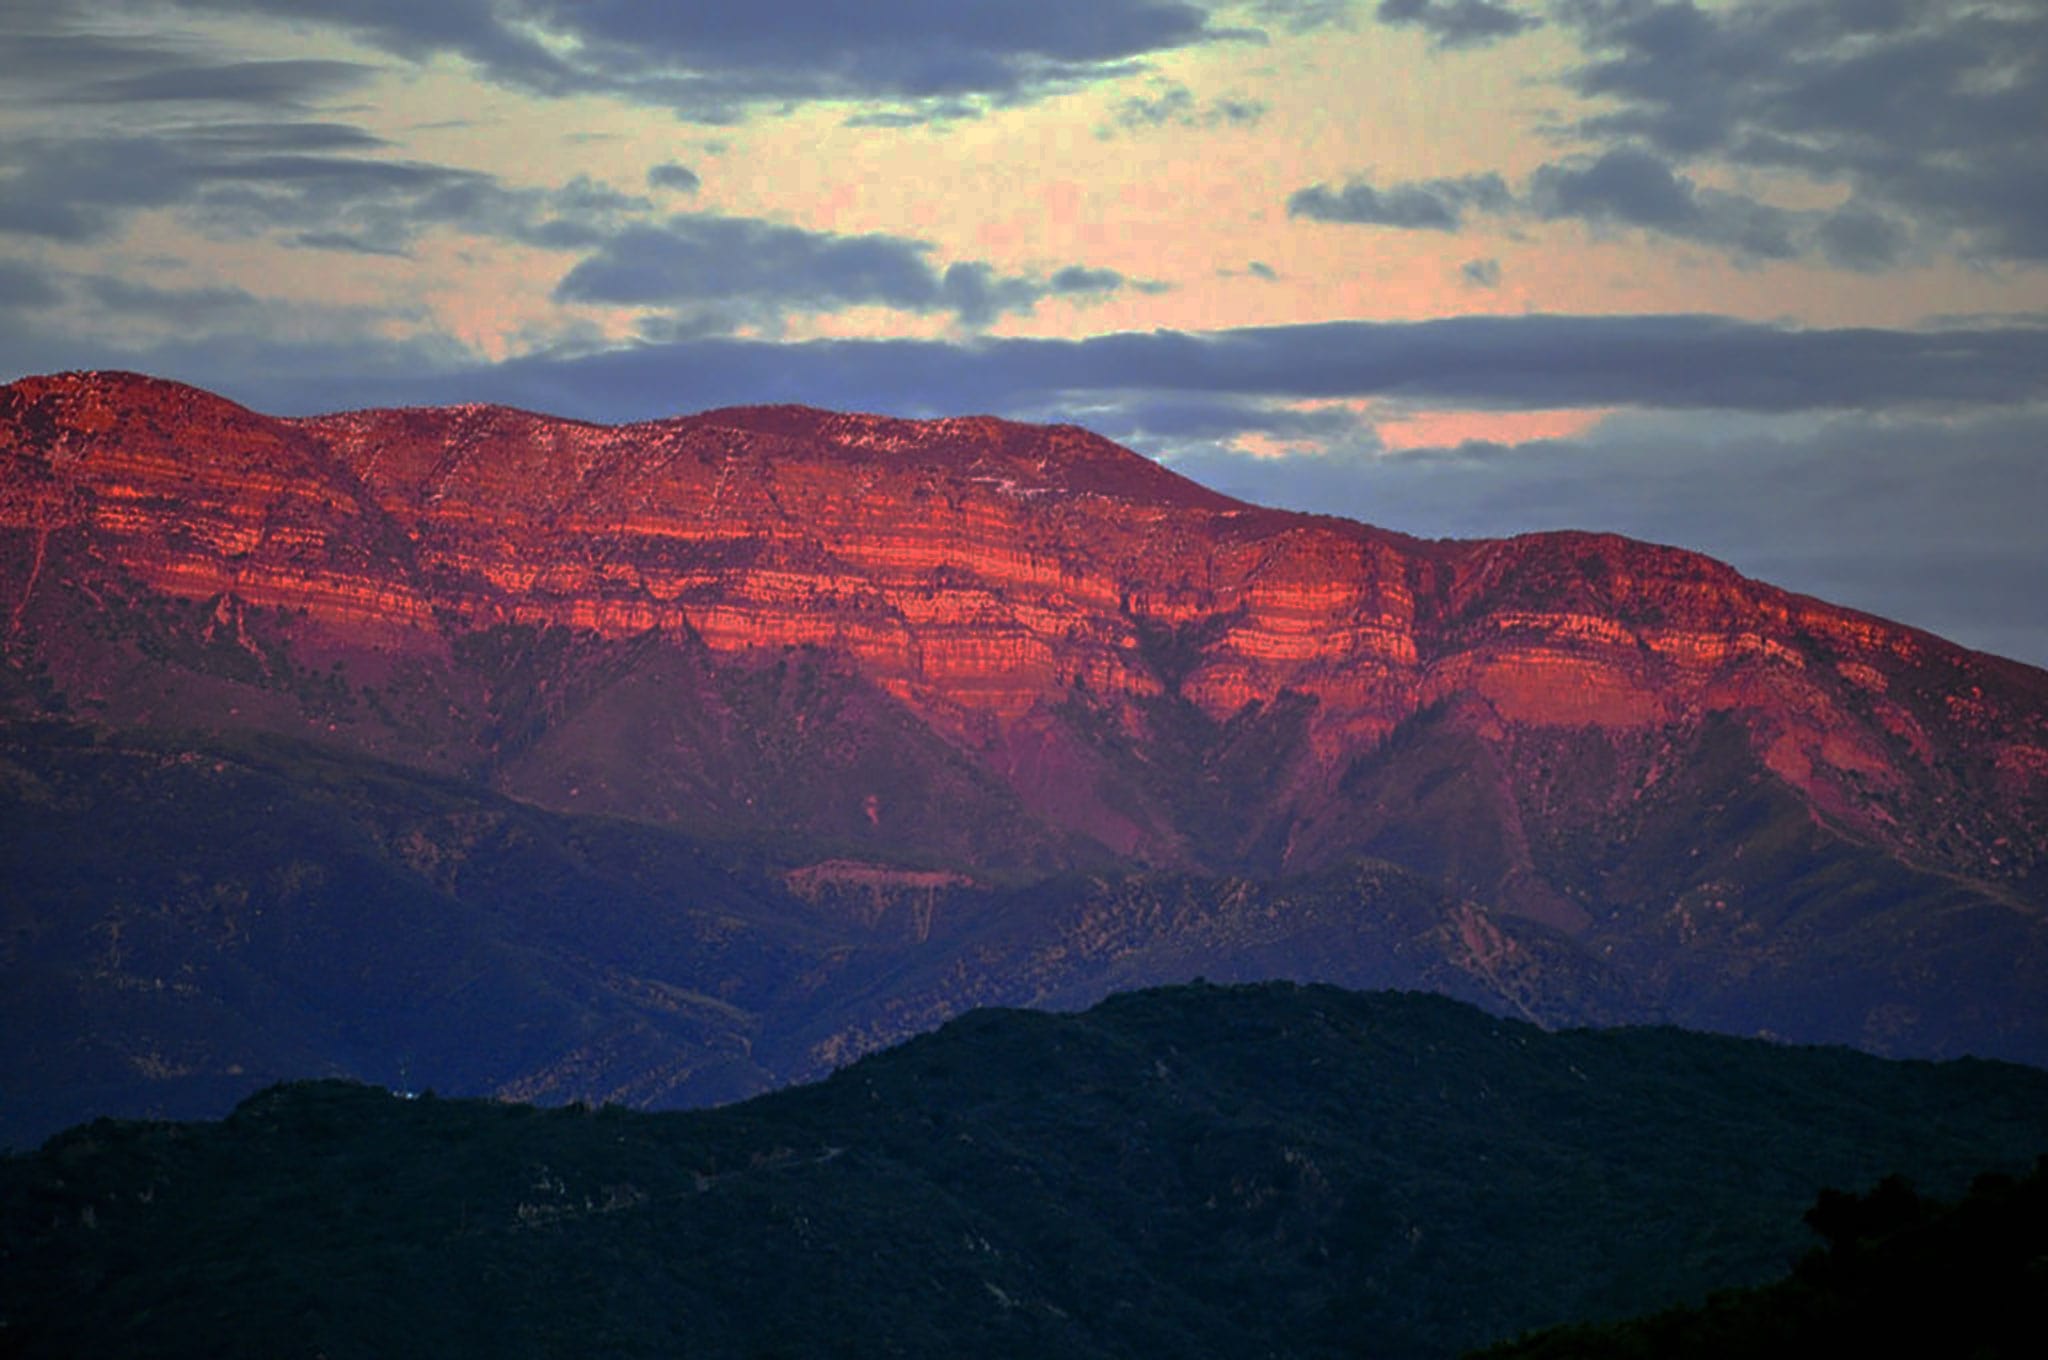 Image of sunset on mountains